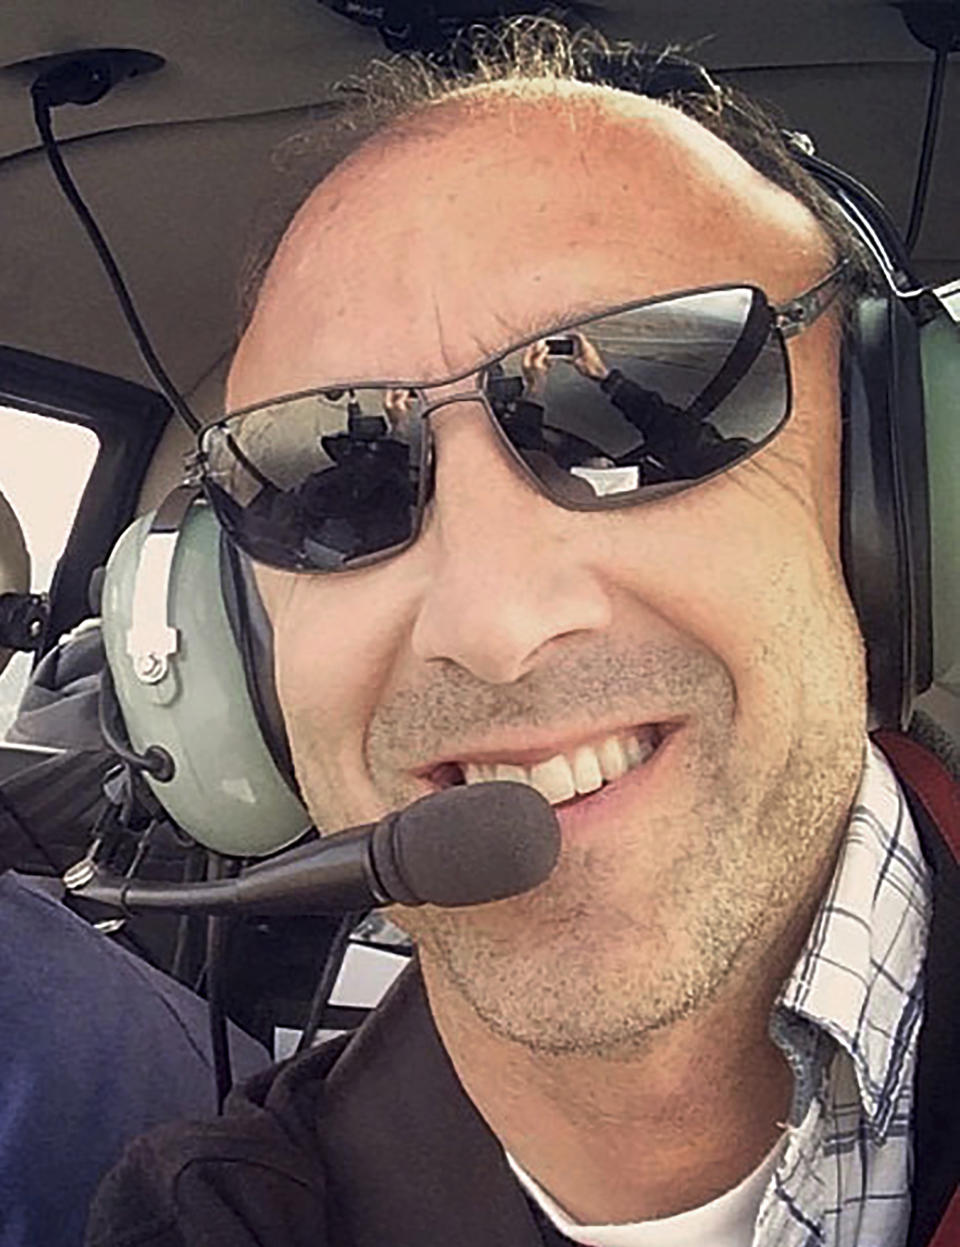 This undated photo provided by Group 3 Aviation shows helicopter pilot Ara Zobayan, who was at the controls of the helicopter that crashed in Southern California, Sunday, Jan. 26, 2020, killing all nine aboard including former Lakers star Kobe Bryant. (Group 3 Aviation via AP)